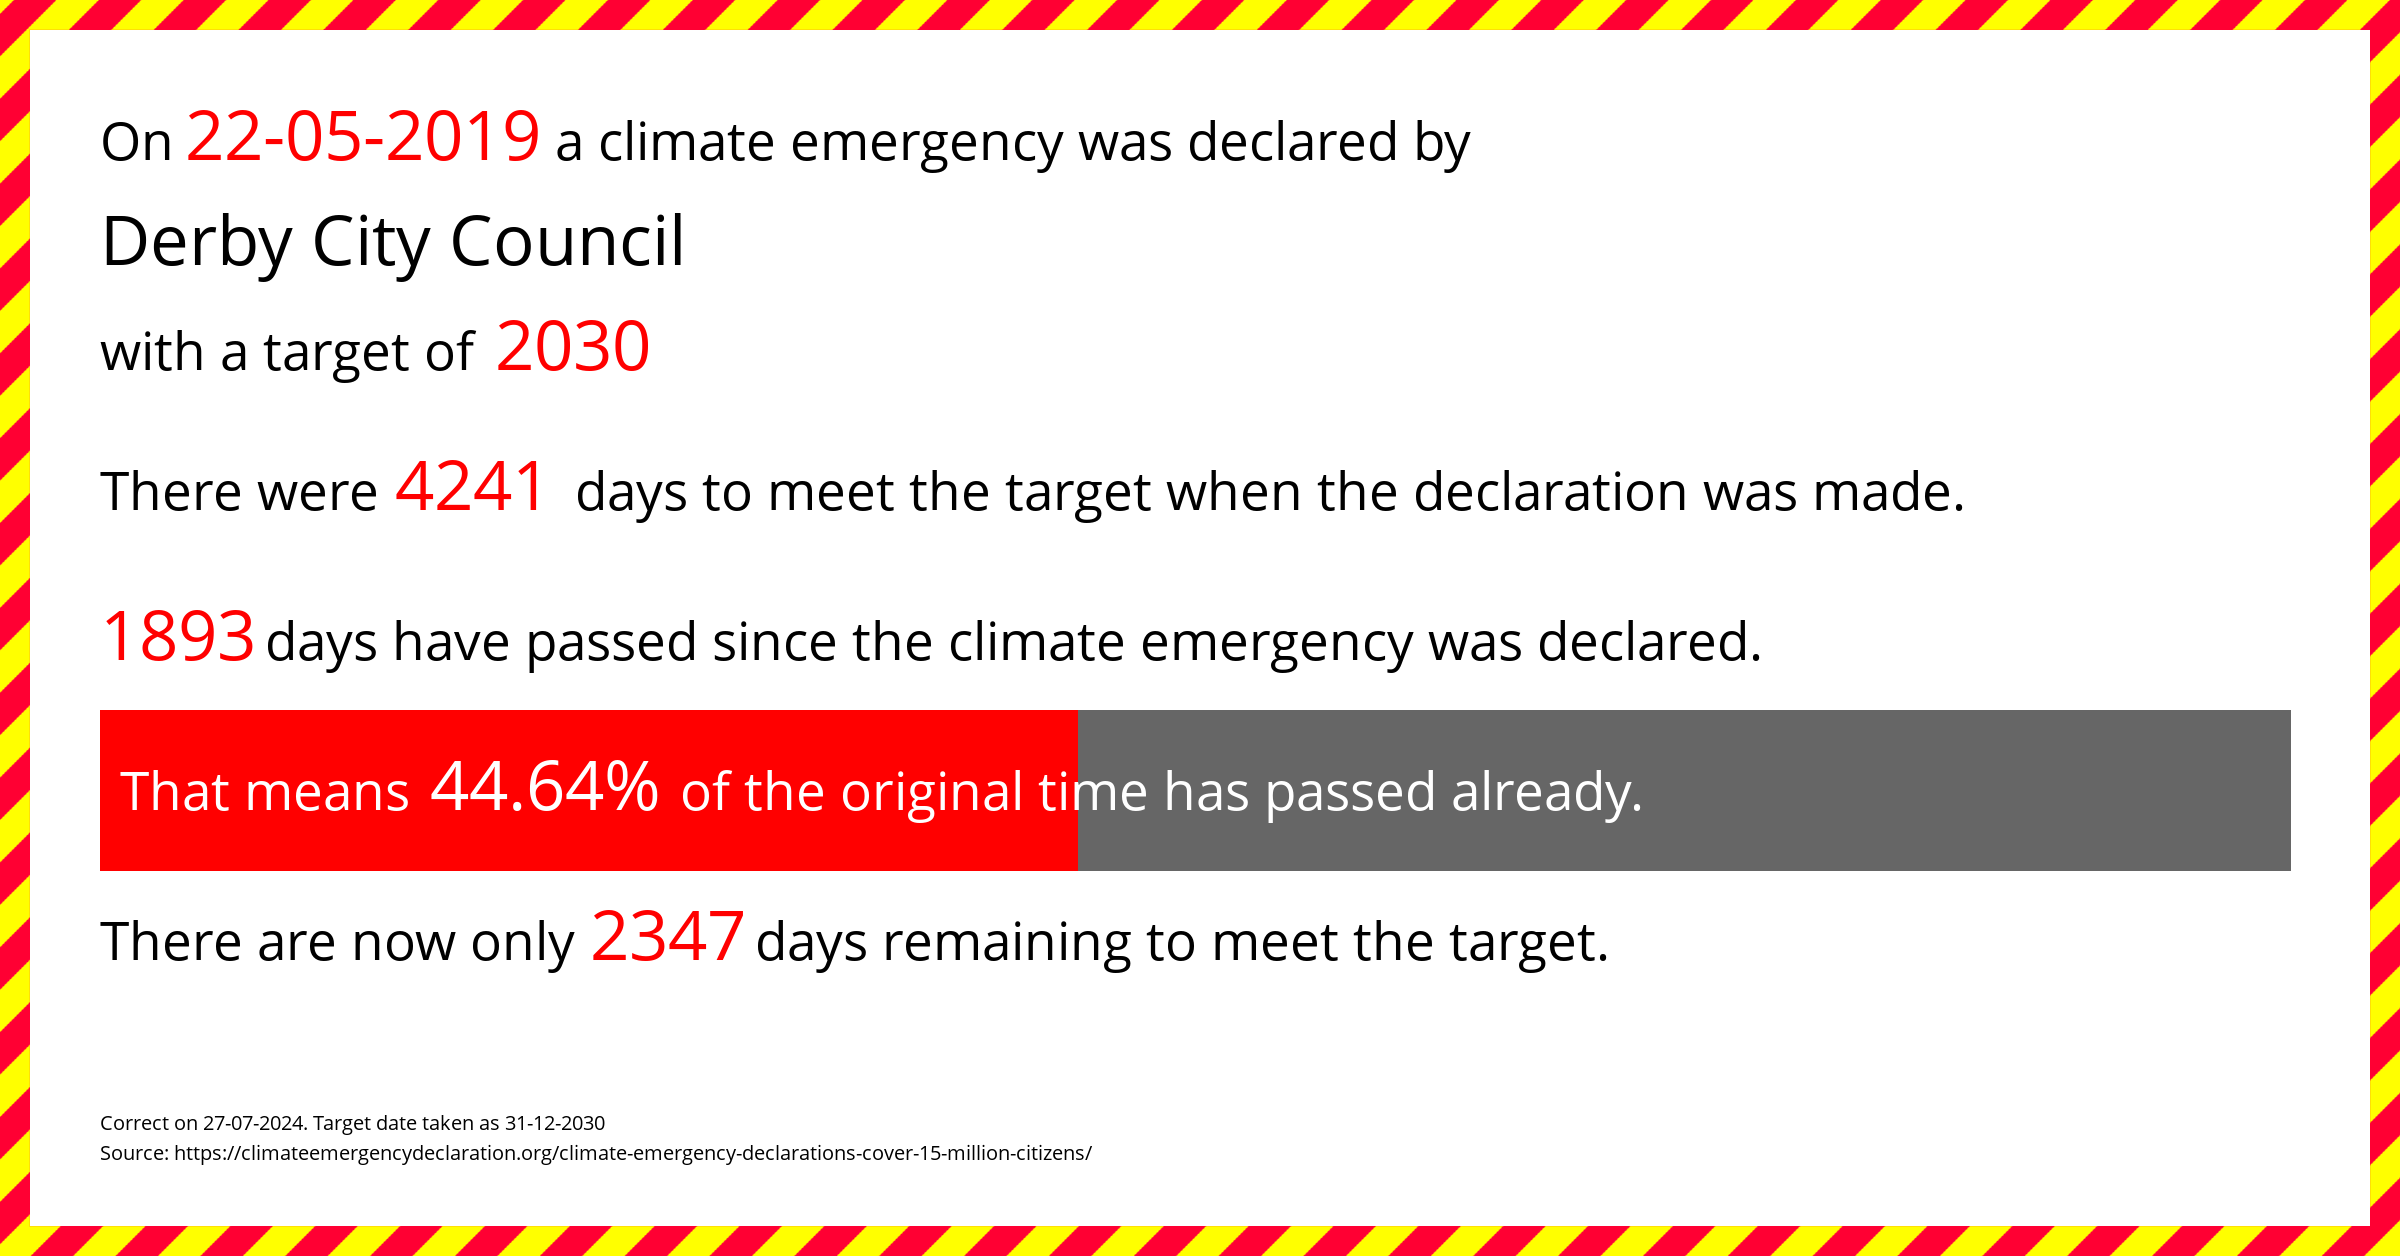 Derby City Council declared a Climate emergency on Wednesday 22nd May 2019, with a target of 2030.